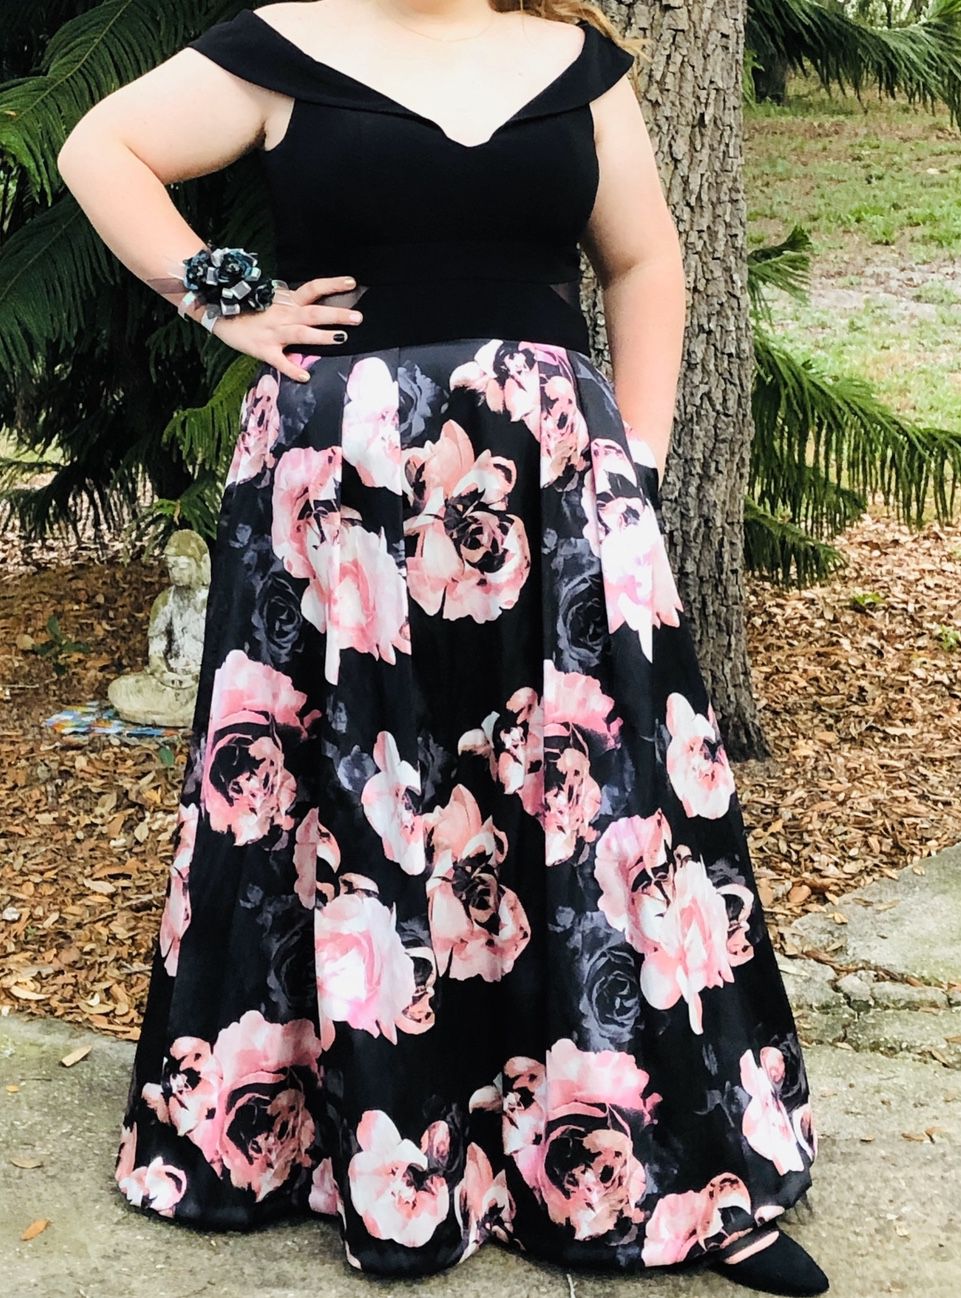 Prom dress from David’s Bridal. Has pockets. Picture does it no justice. Paid $299. There is 2 small sheer cut outs on the sides where the floral